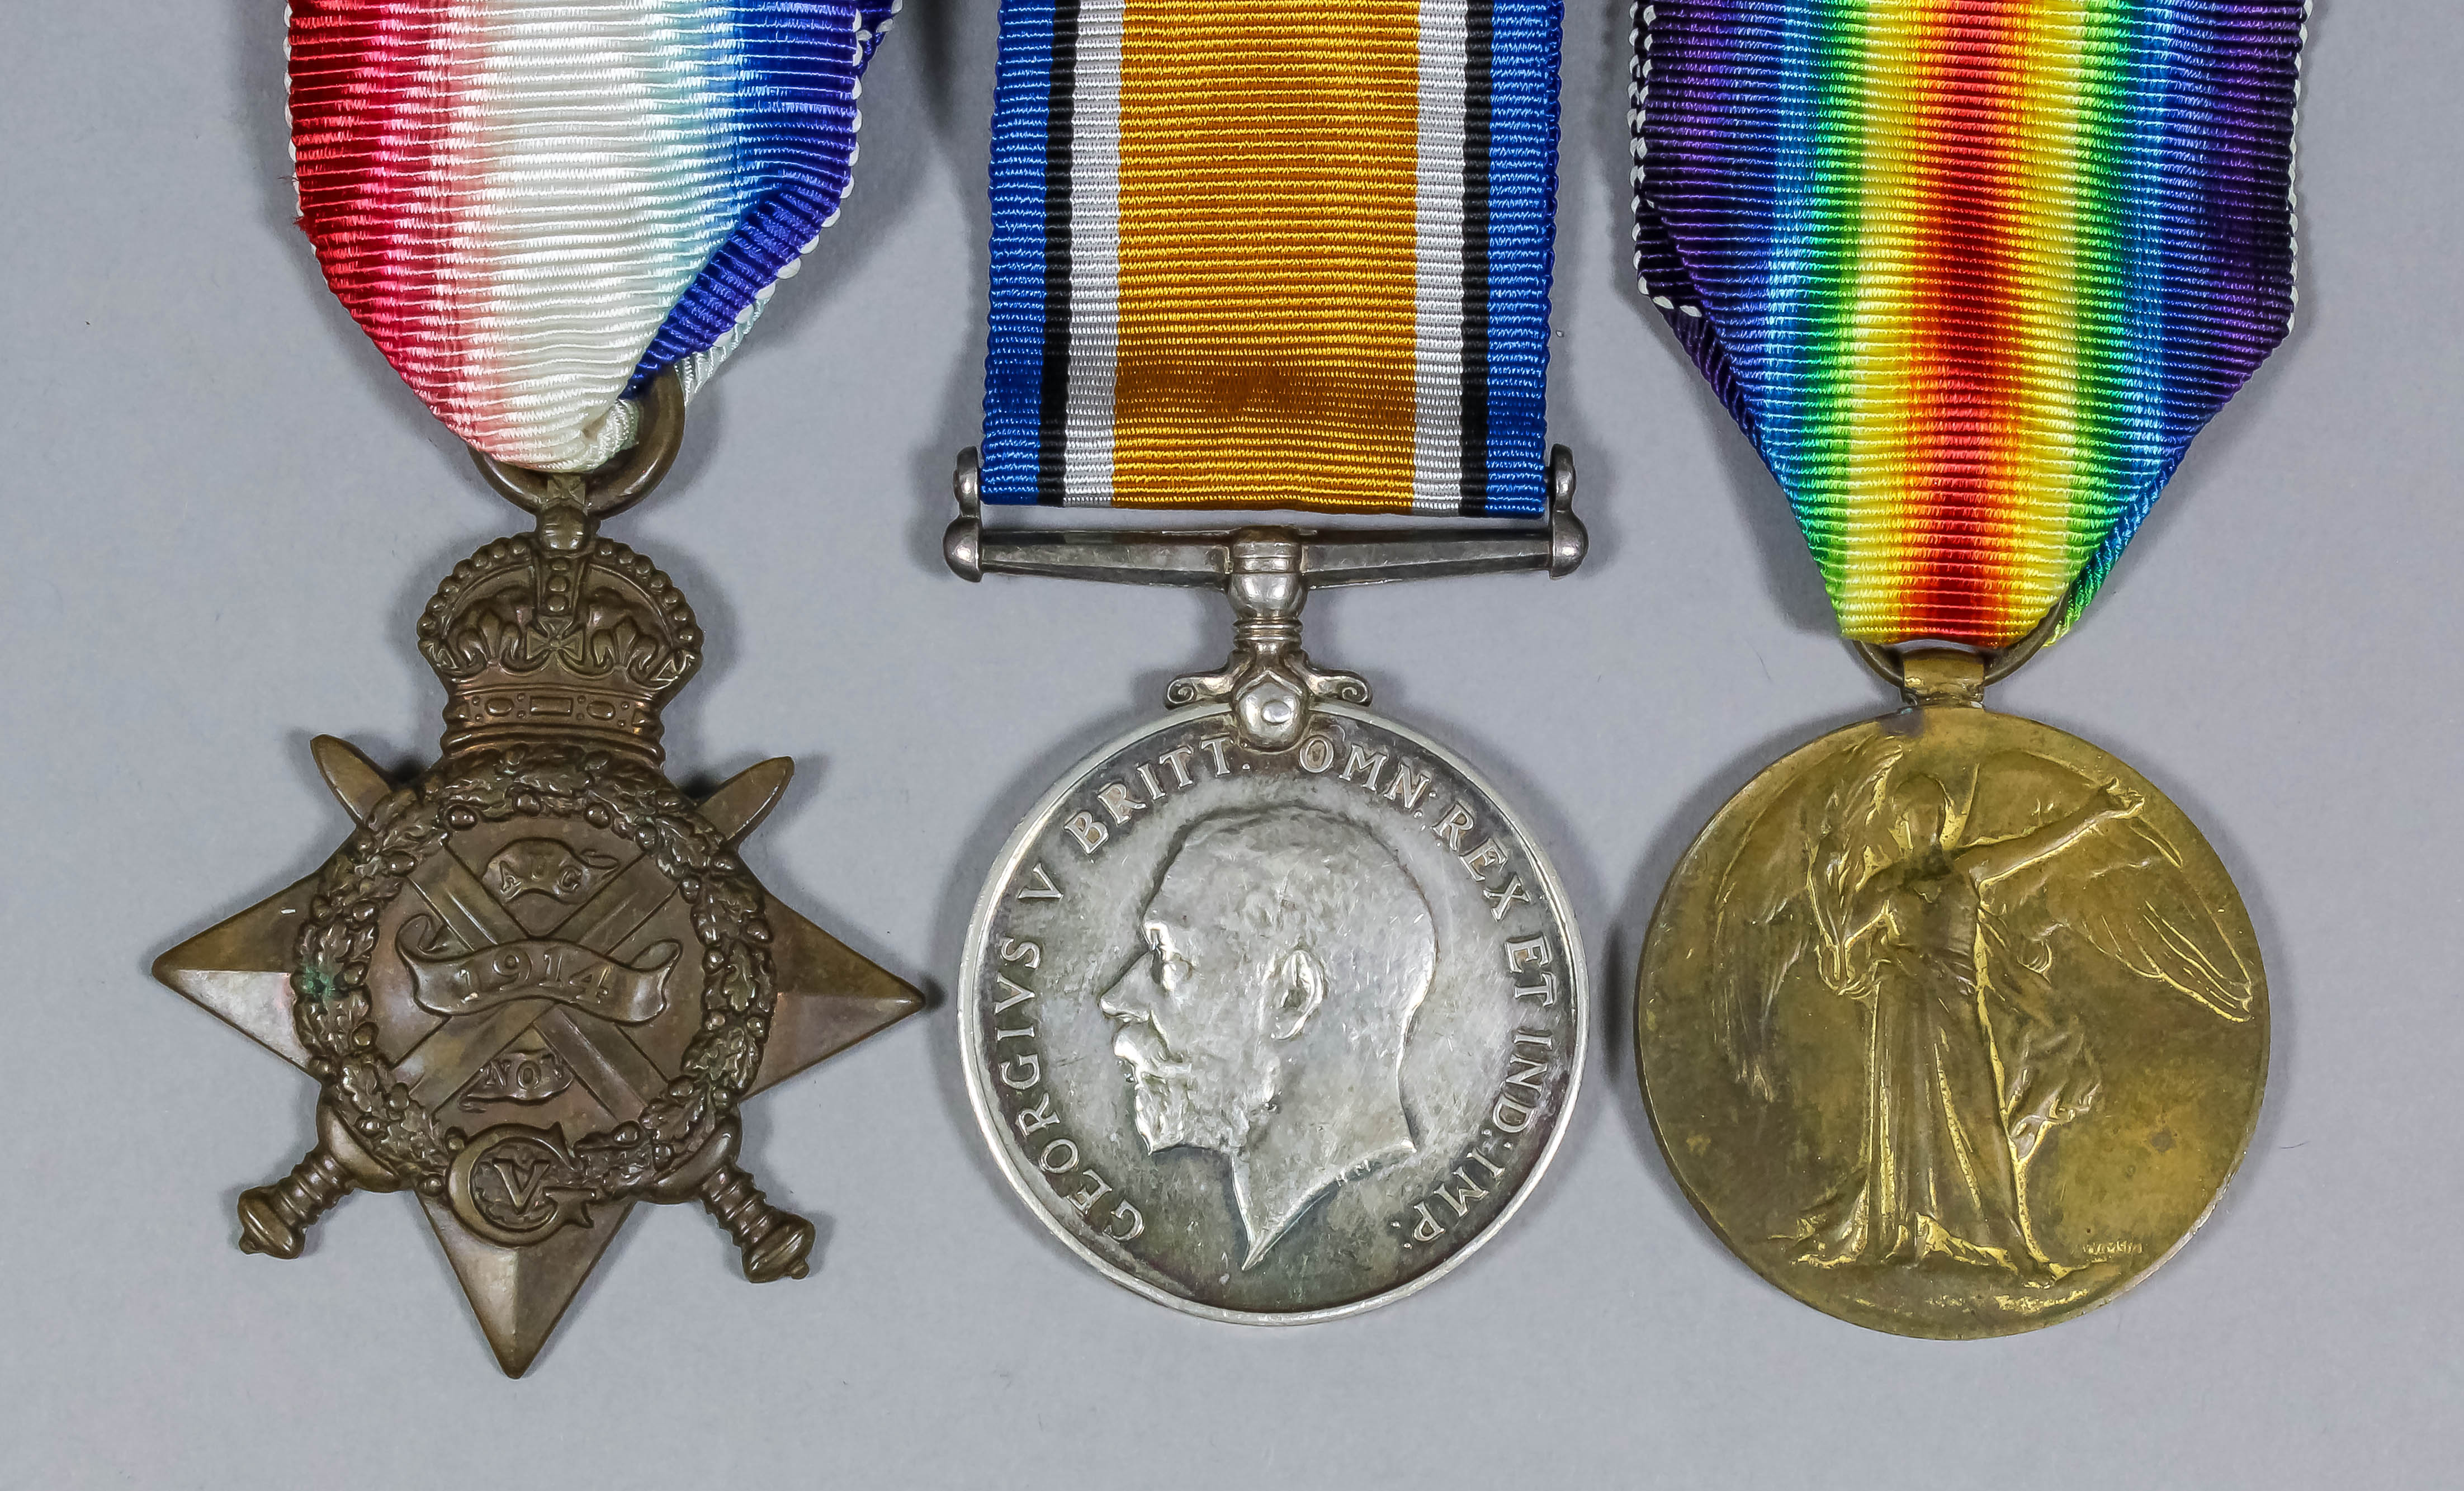 A group of three George V First World War medals comprising - 1914 Star, 1914-18 War Medal,